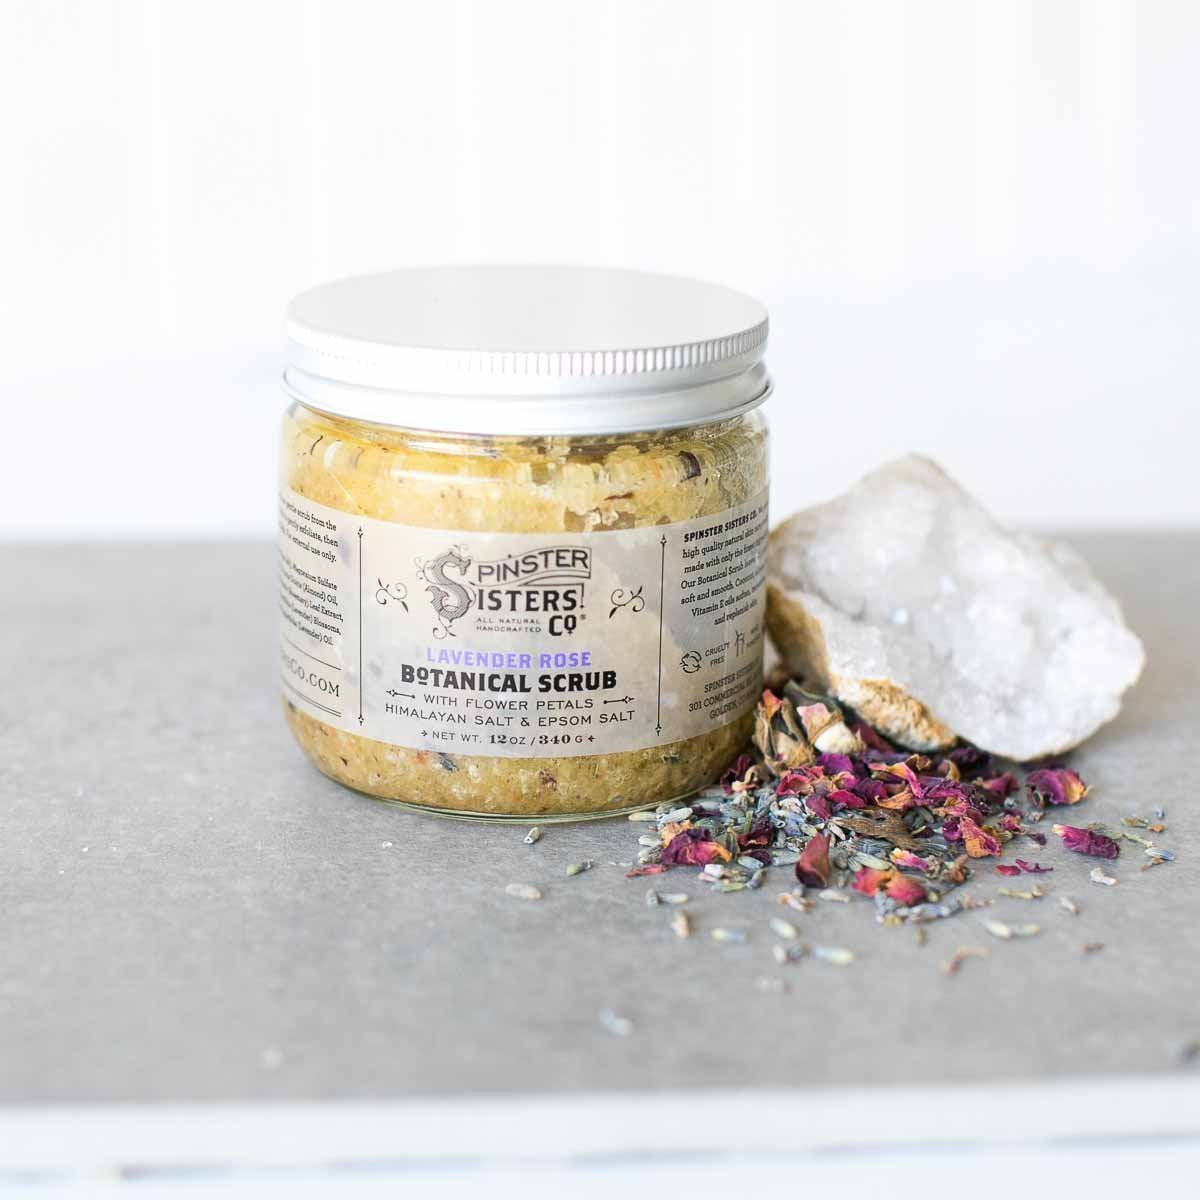 A jar of Spinster Sisters Lavender Rose Botanical Scrub on a light background, with scattered dried flowers and crystal beside it. The label lists natural, moisturizing ingredients.